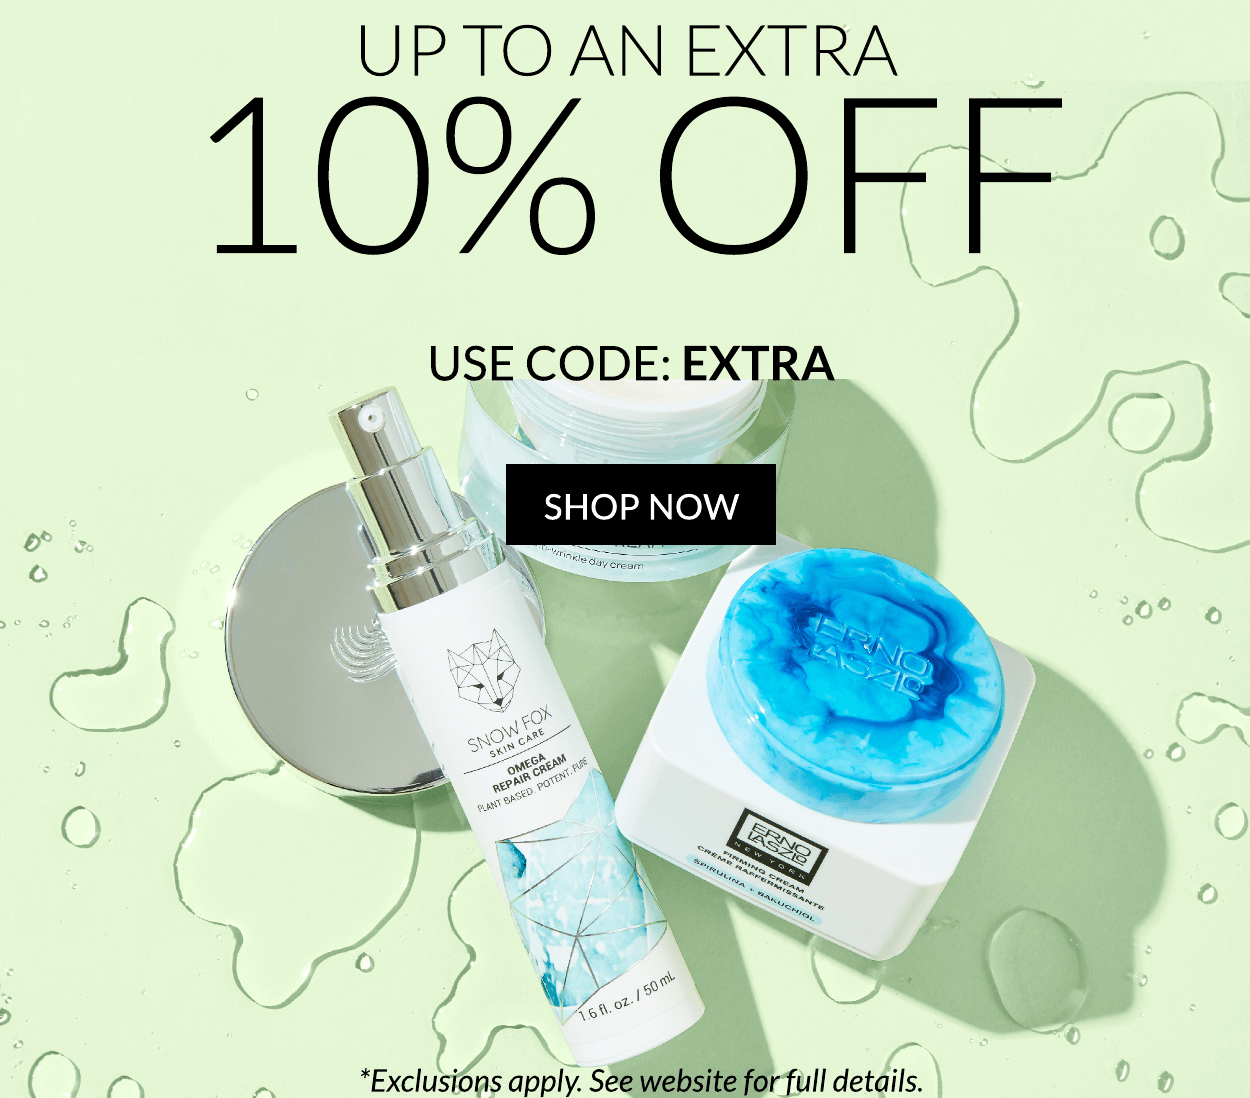 UP TO AN EXTRA 10% OFF